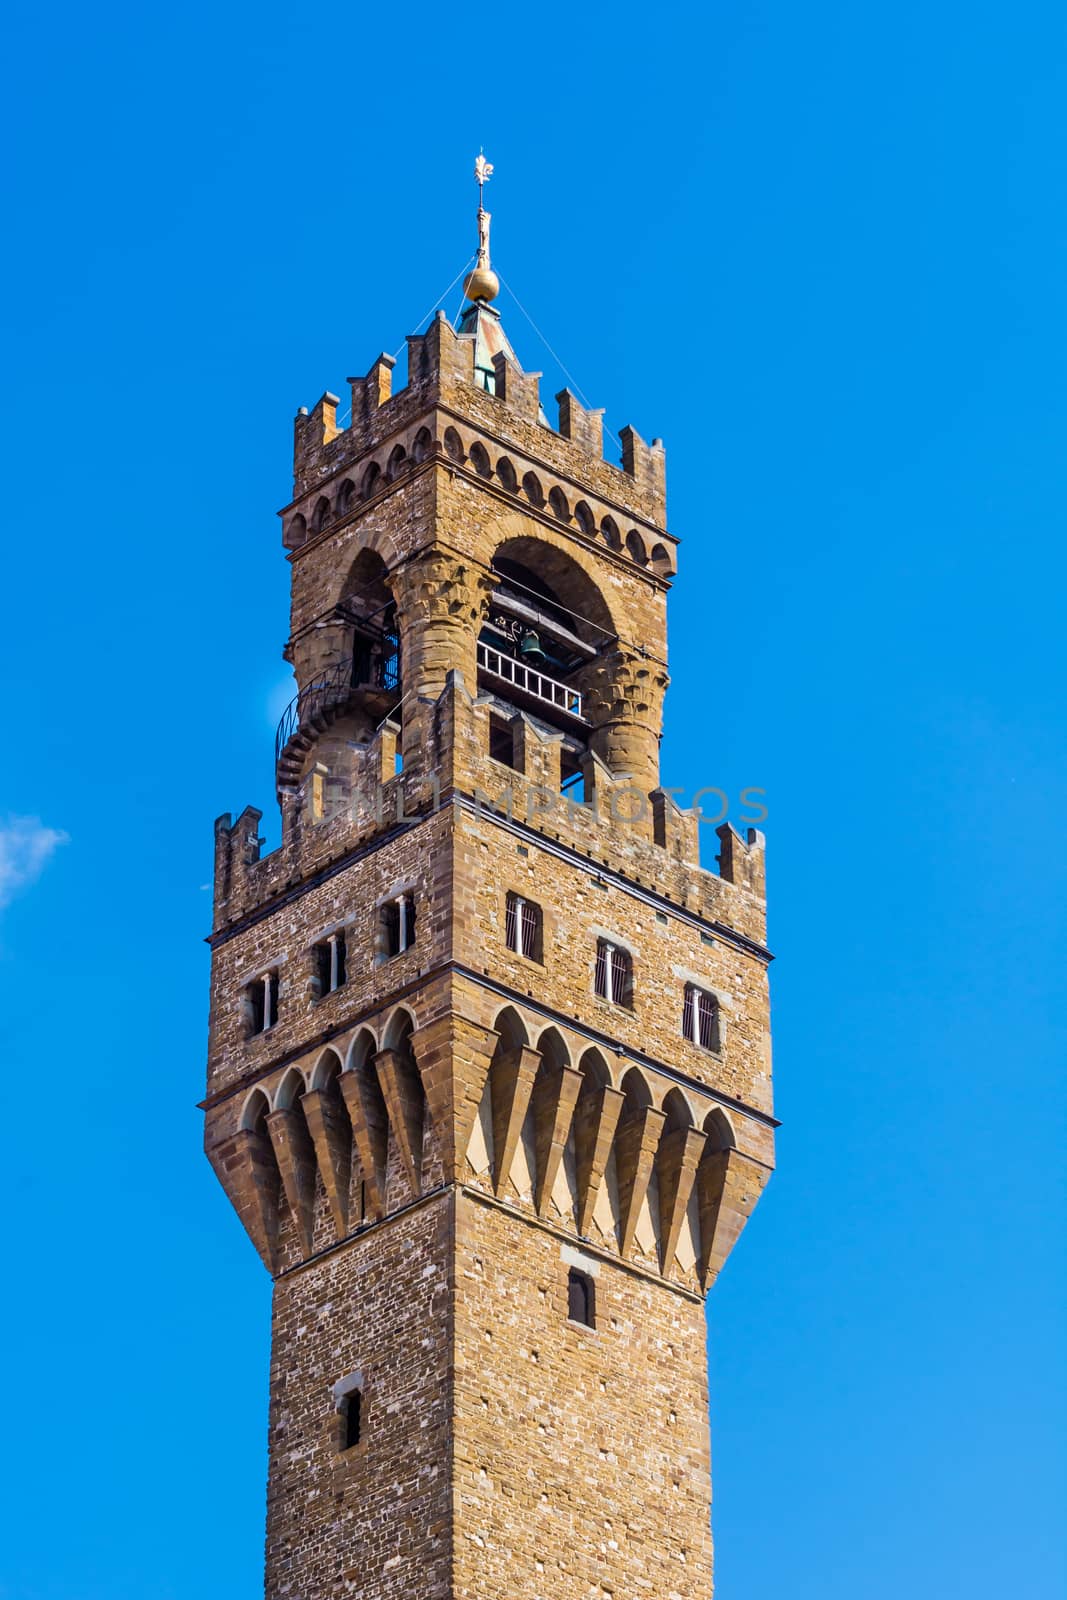 the bell tower of Palazzo Vecchio in Florence, Italy